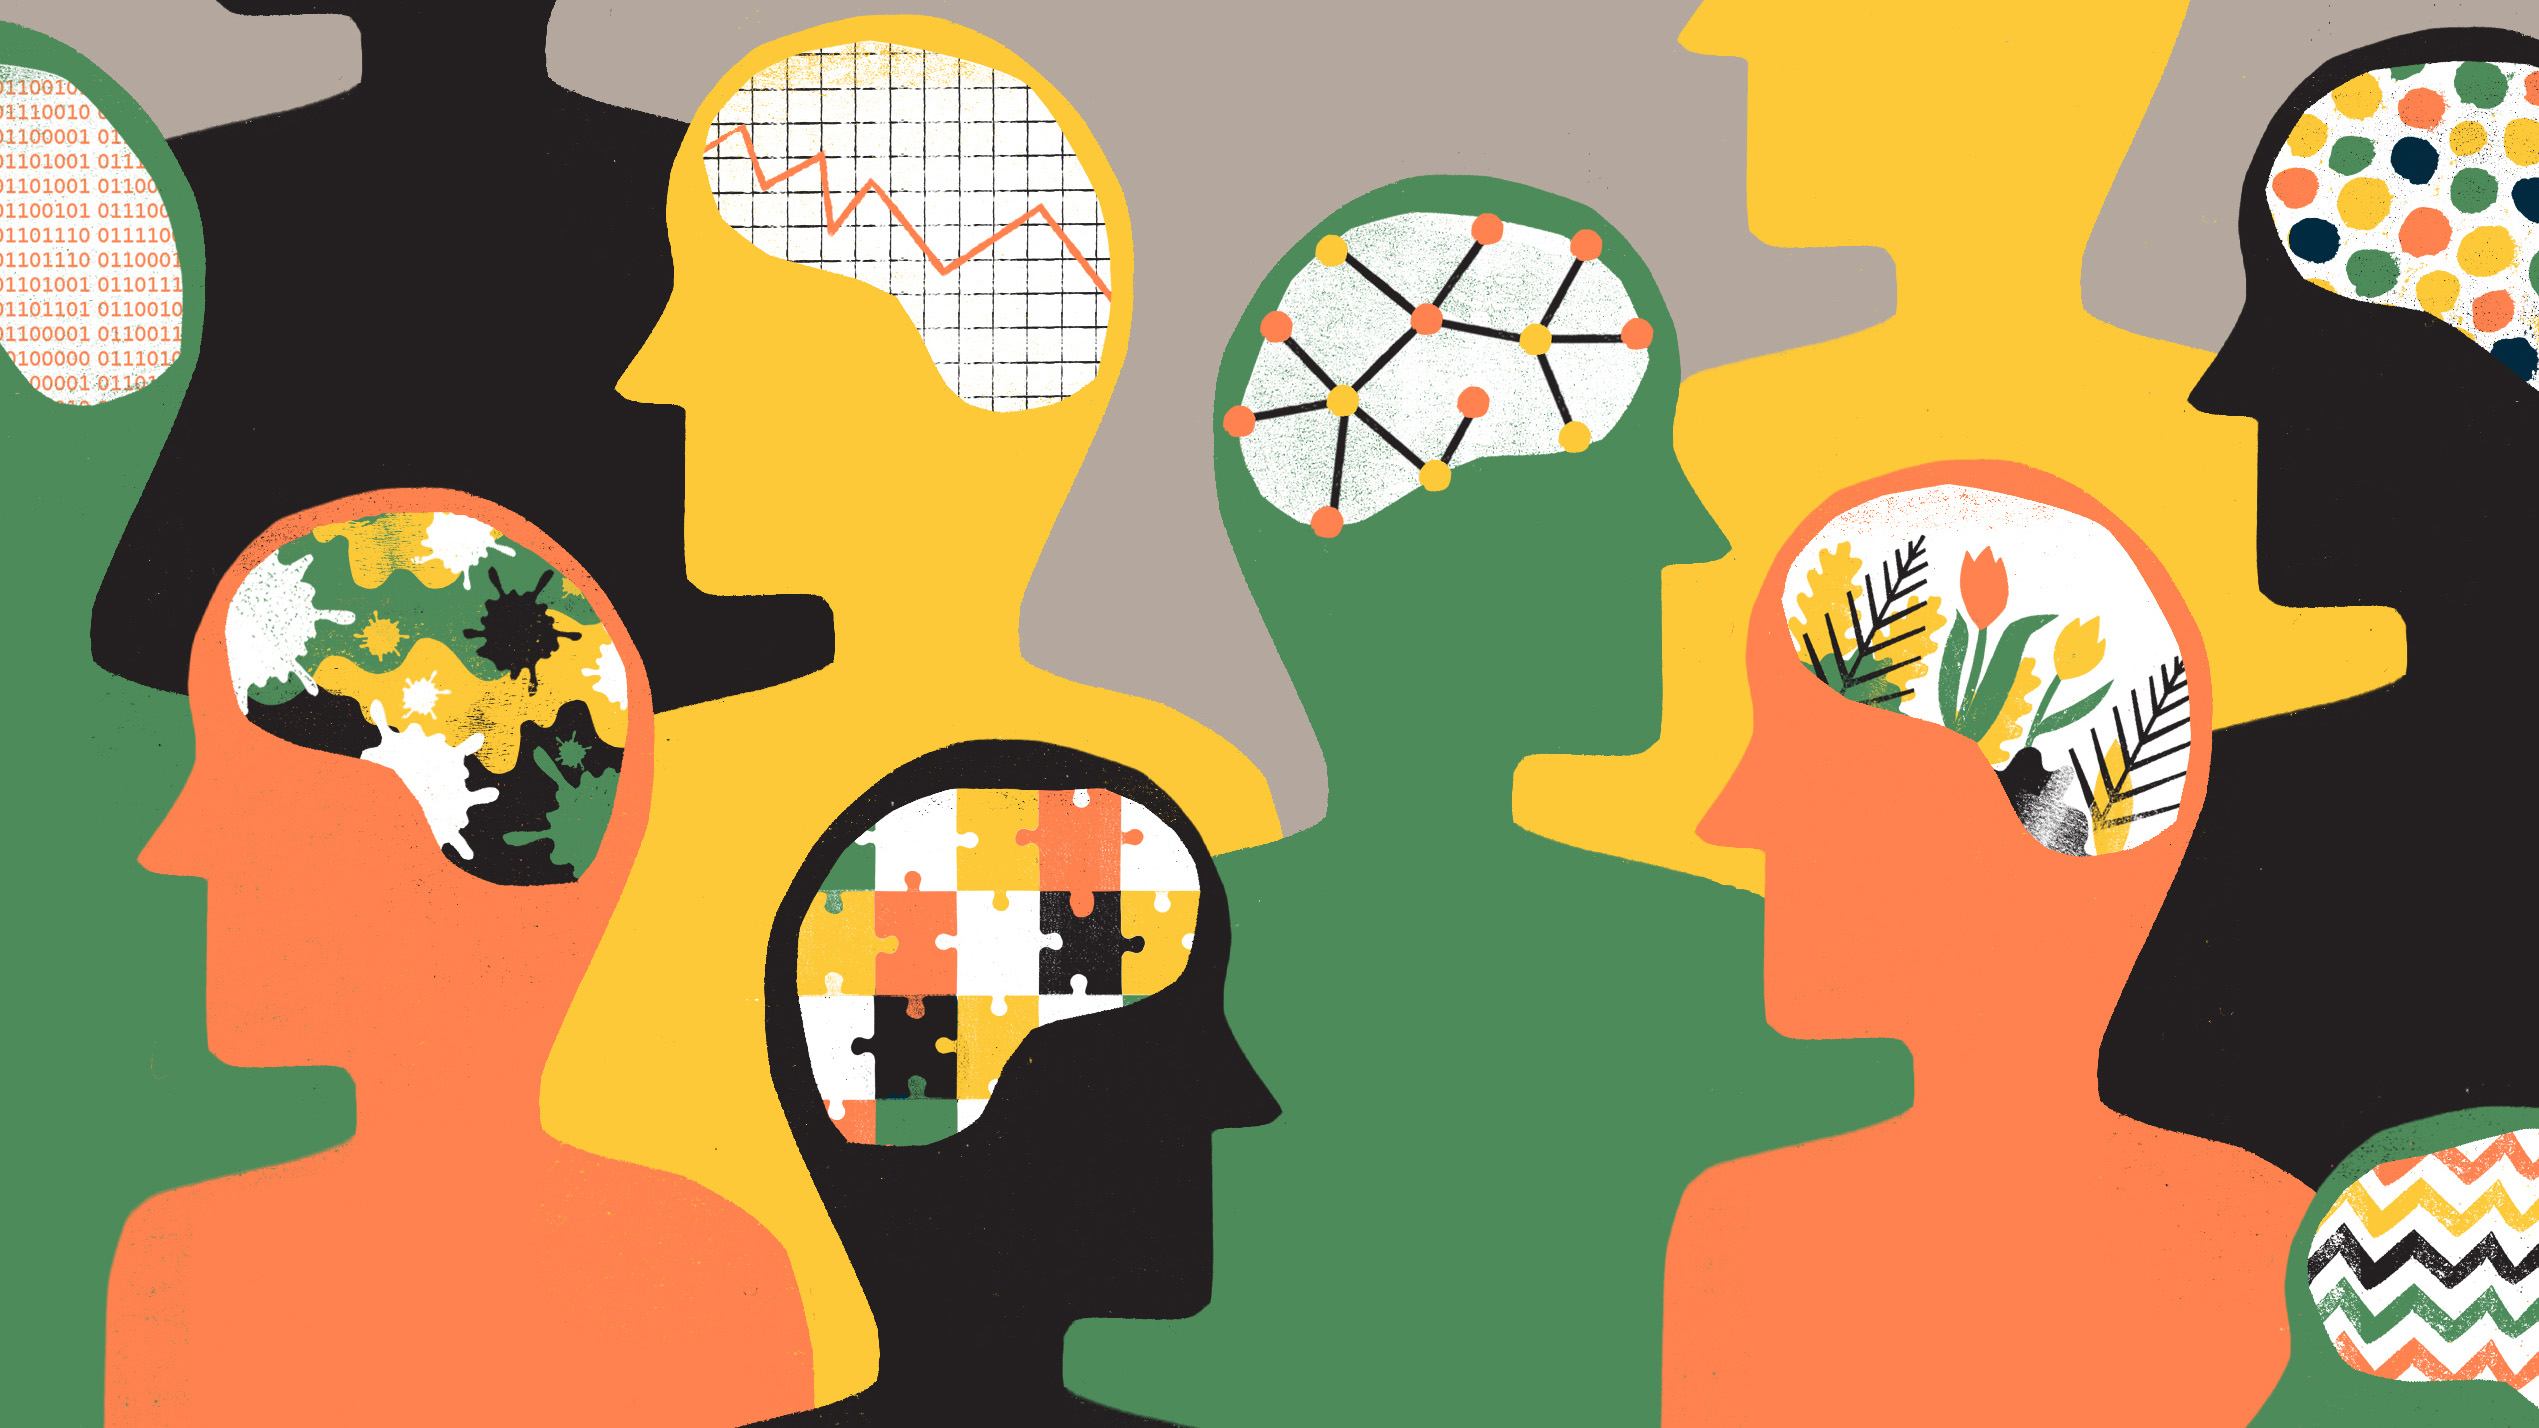 A number of different silhouettes of people with outlines of unique patterns in their brains, representing neurodiversity. Decorative: the silhouettes are in green, yellow, orange, and black.